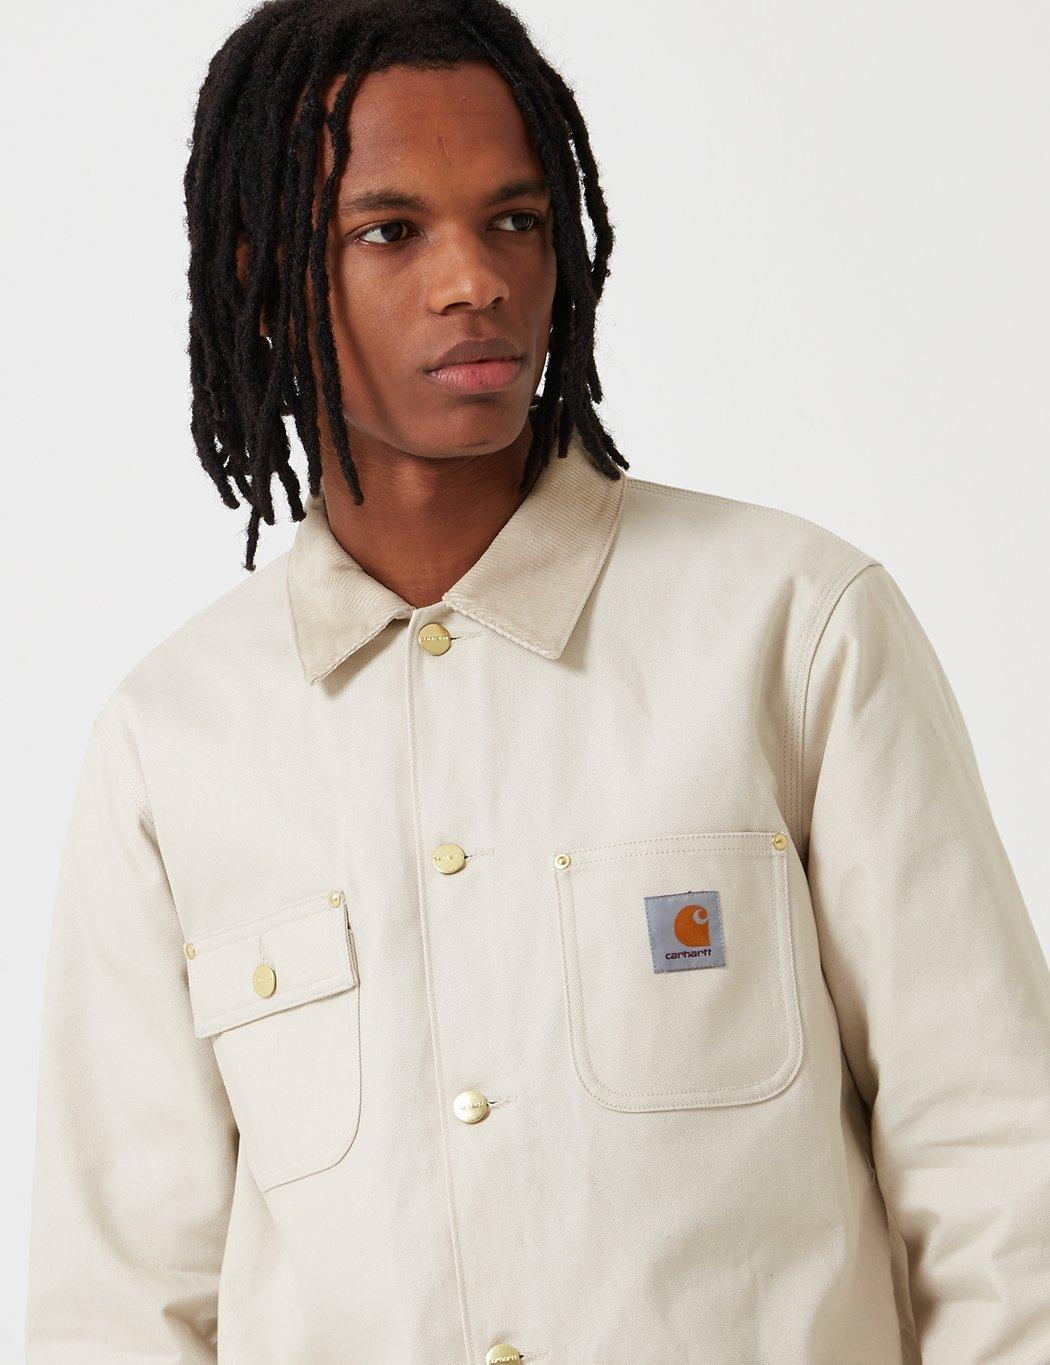 Carhartt Cotton Wip Michigan Chore Jacket (blanket Lined) in Beige  (Natural) for Men - Lyst